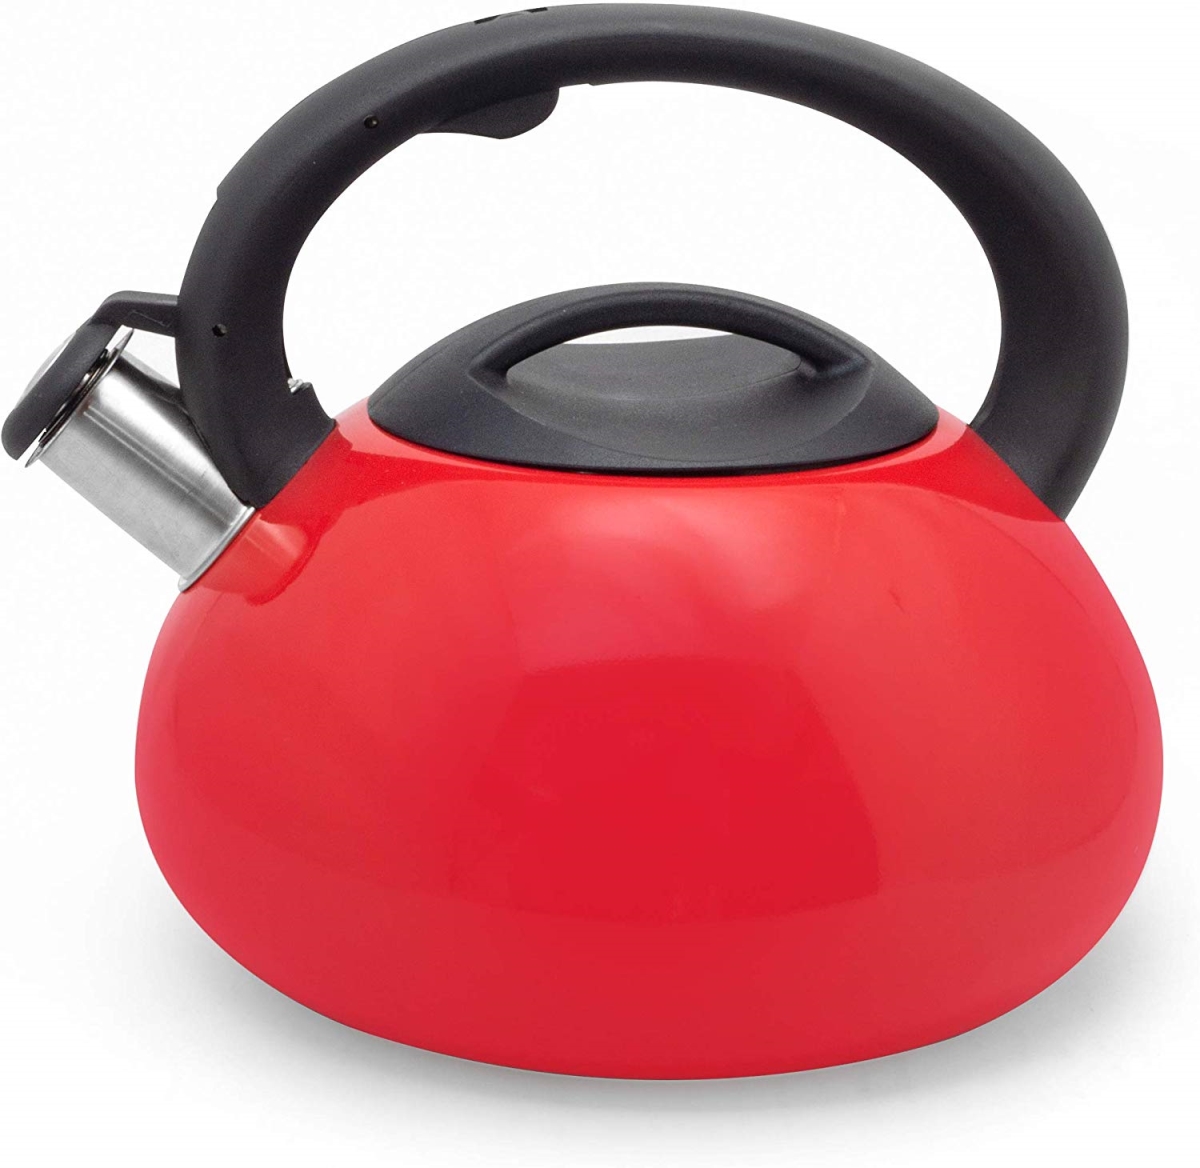 Cookpro 425r 3 Qt. Excel Stainless Steel Whistling Tea Kettle, Red